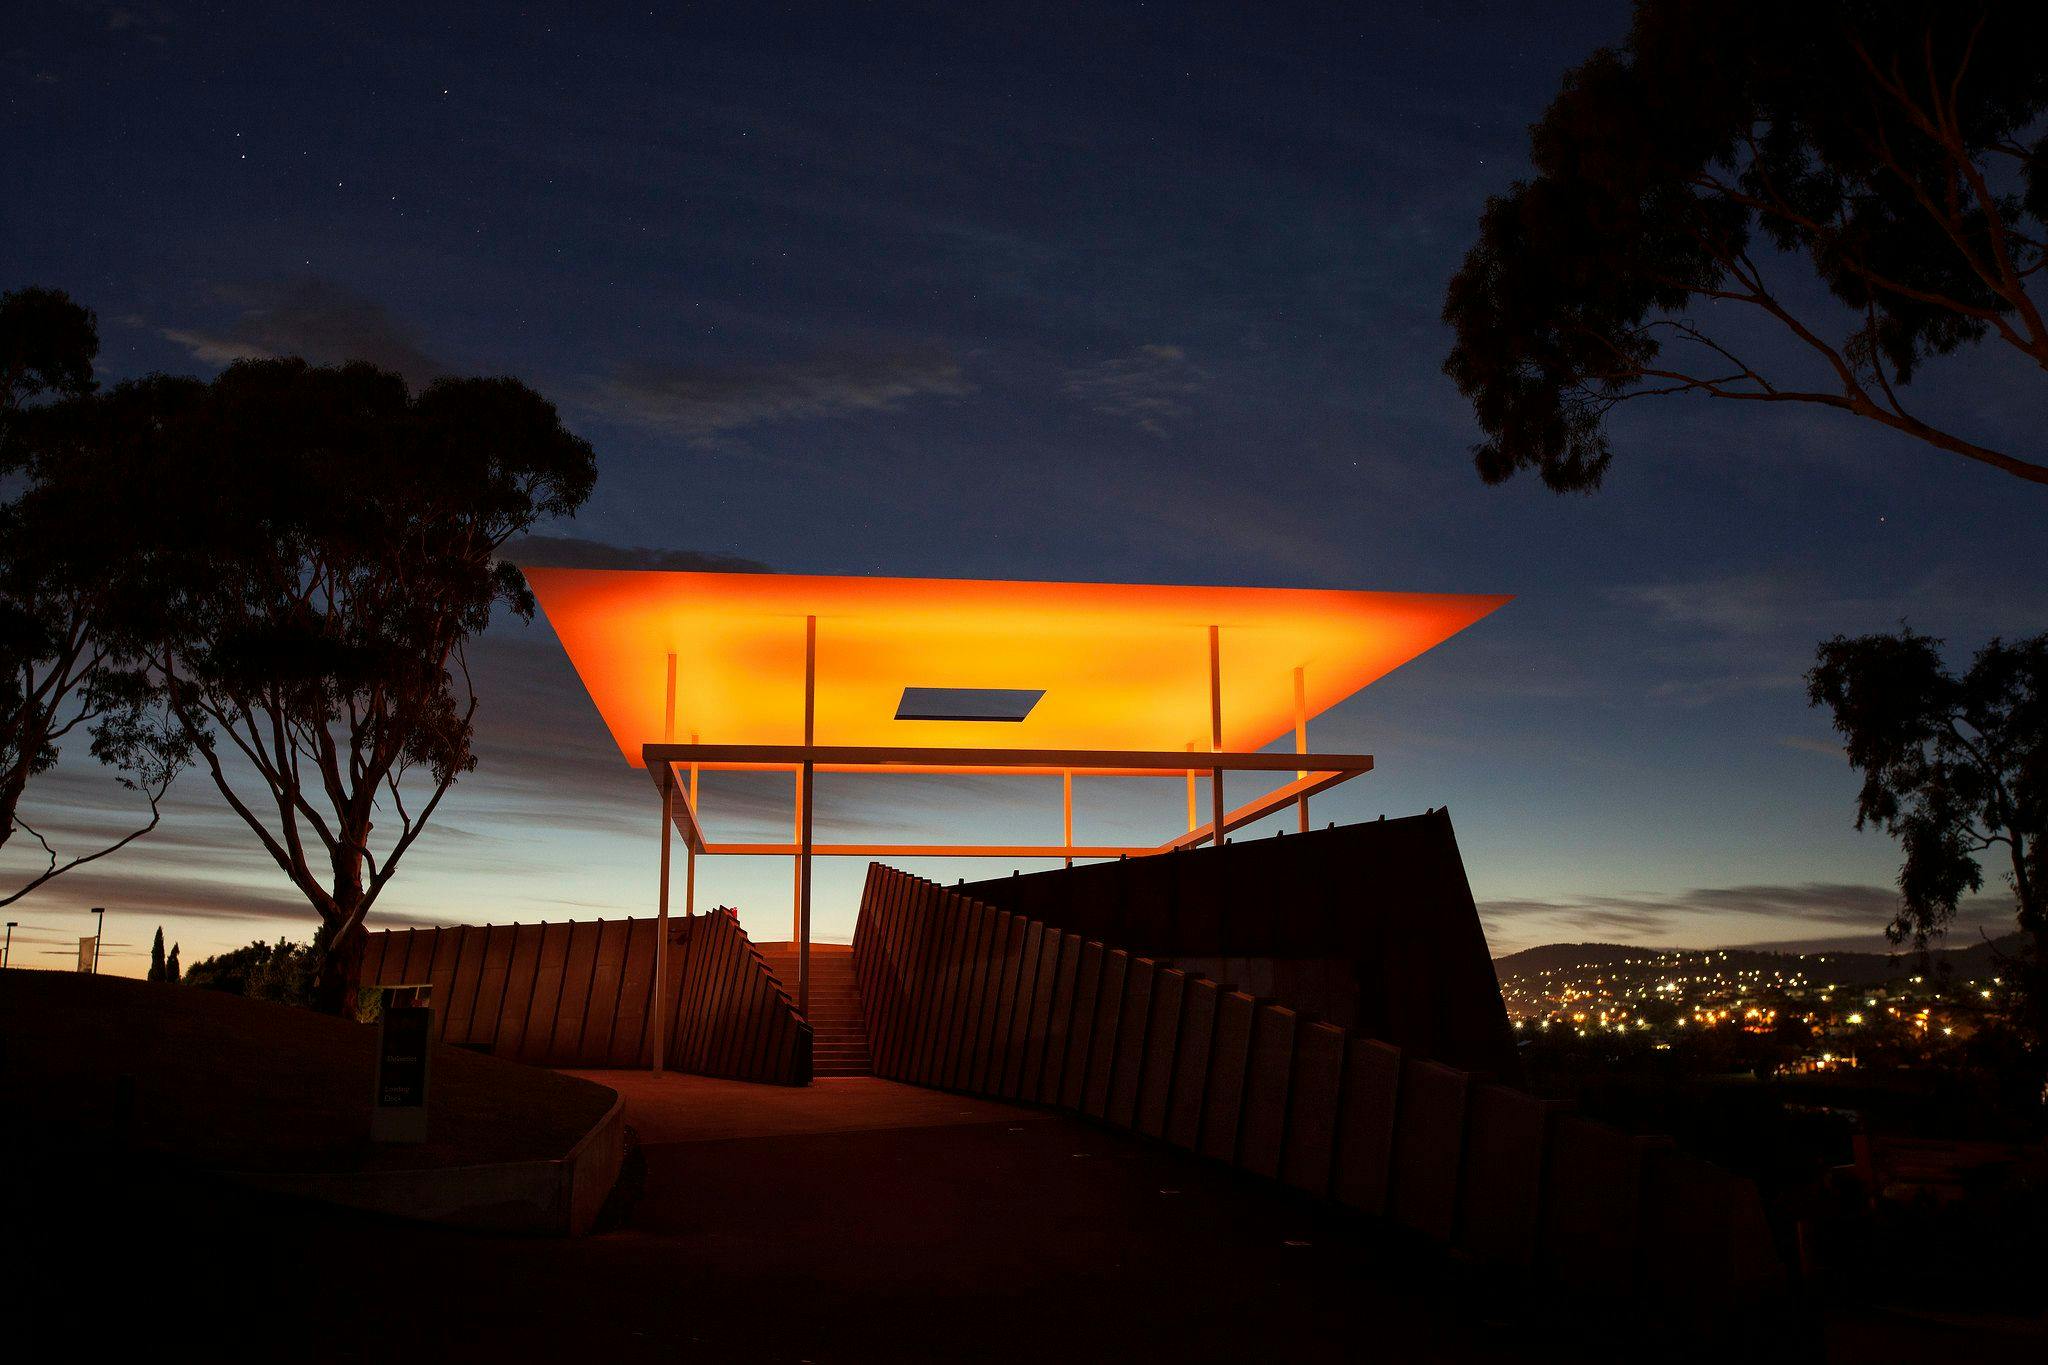 A large outdoor light installation, projecting bright orange hues at night